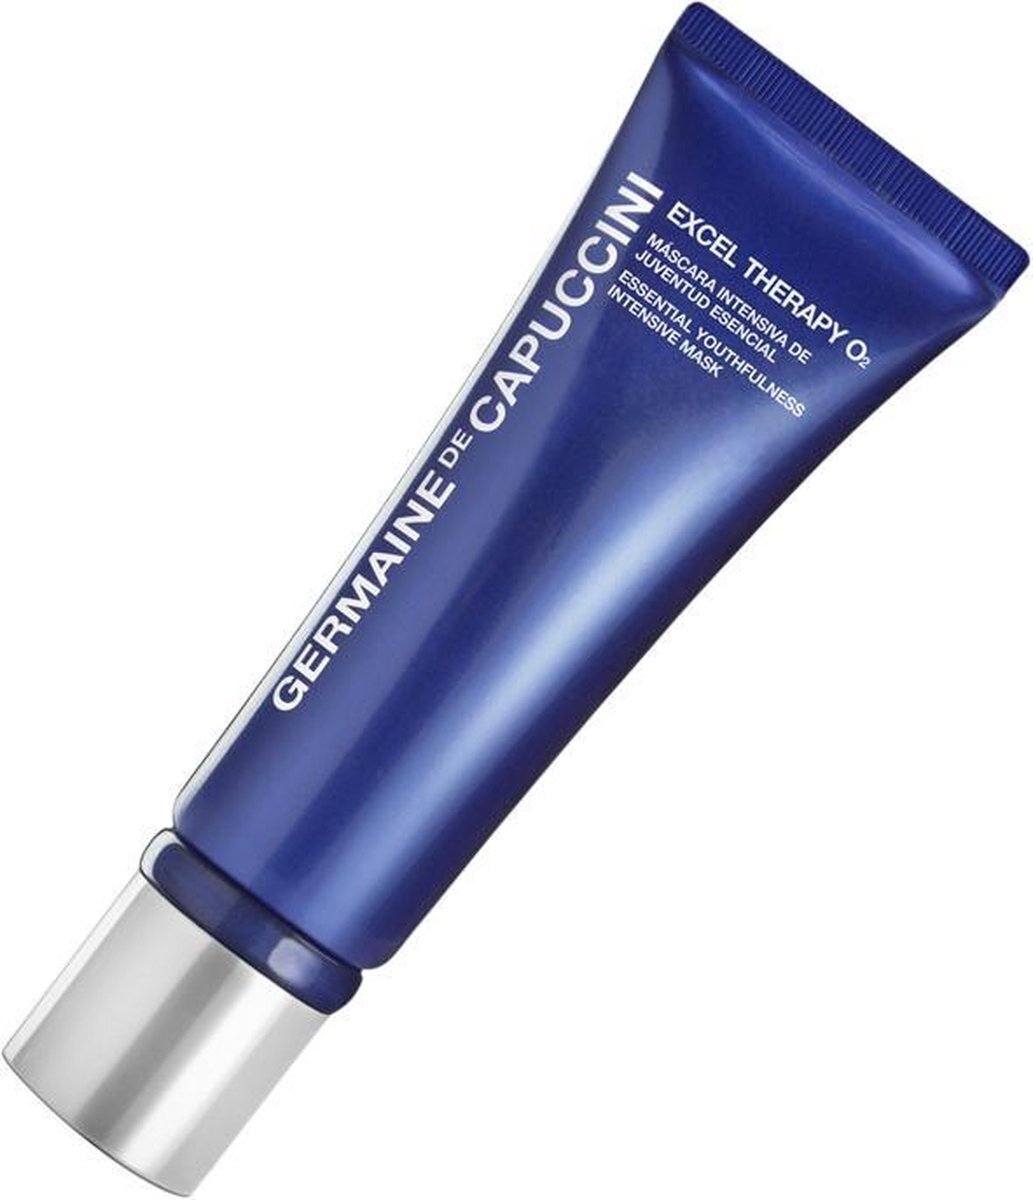 Germaine de Capuccini Excel Therapy O2 Essential Youthfulness Intensive Mask